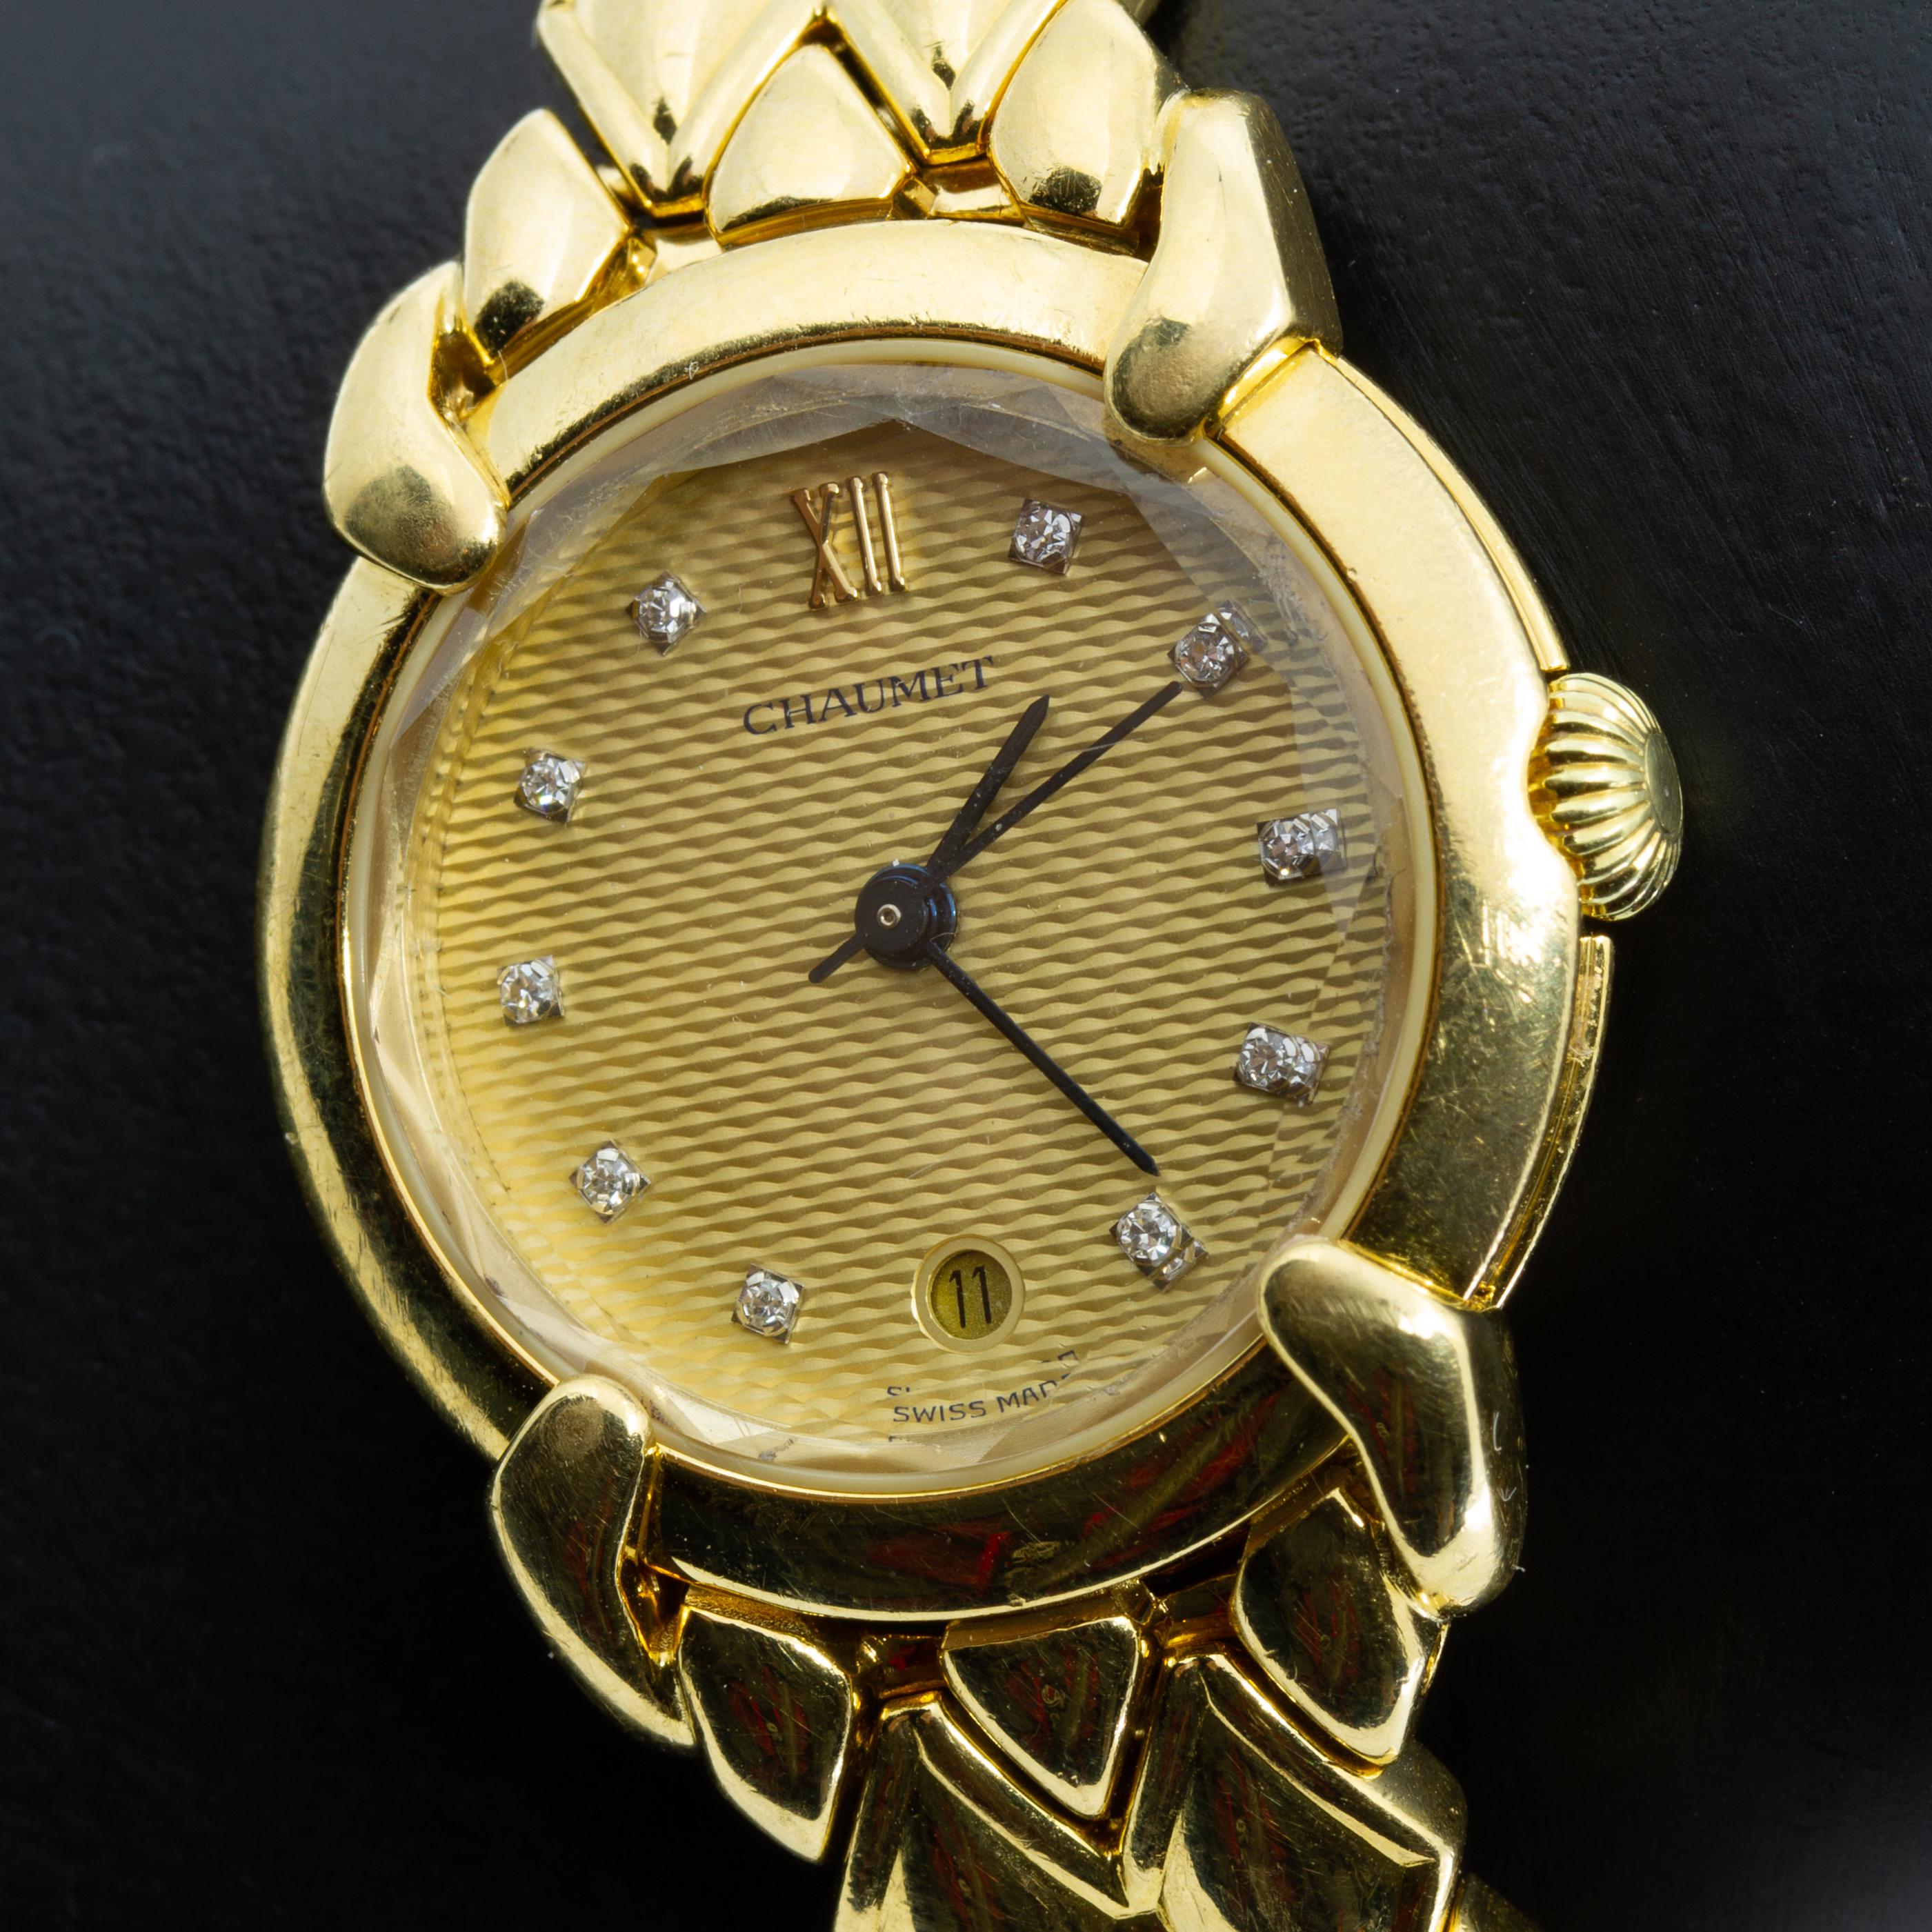 Offered is a Chaumet Diamond wristwatch, 18k 60.4dwt 
Champagne Guilloche Dial with Diamond Hour Markers, Date Indicator, Second Hand, and Sapphire Crystal.Matching 18K Yellow Gold Chaumet Bracelet with Hidden Clasp. 
Quartz Accuracy Movement.